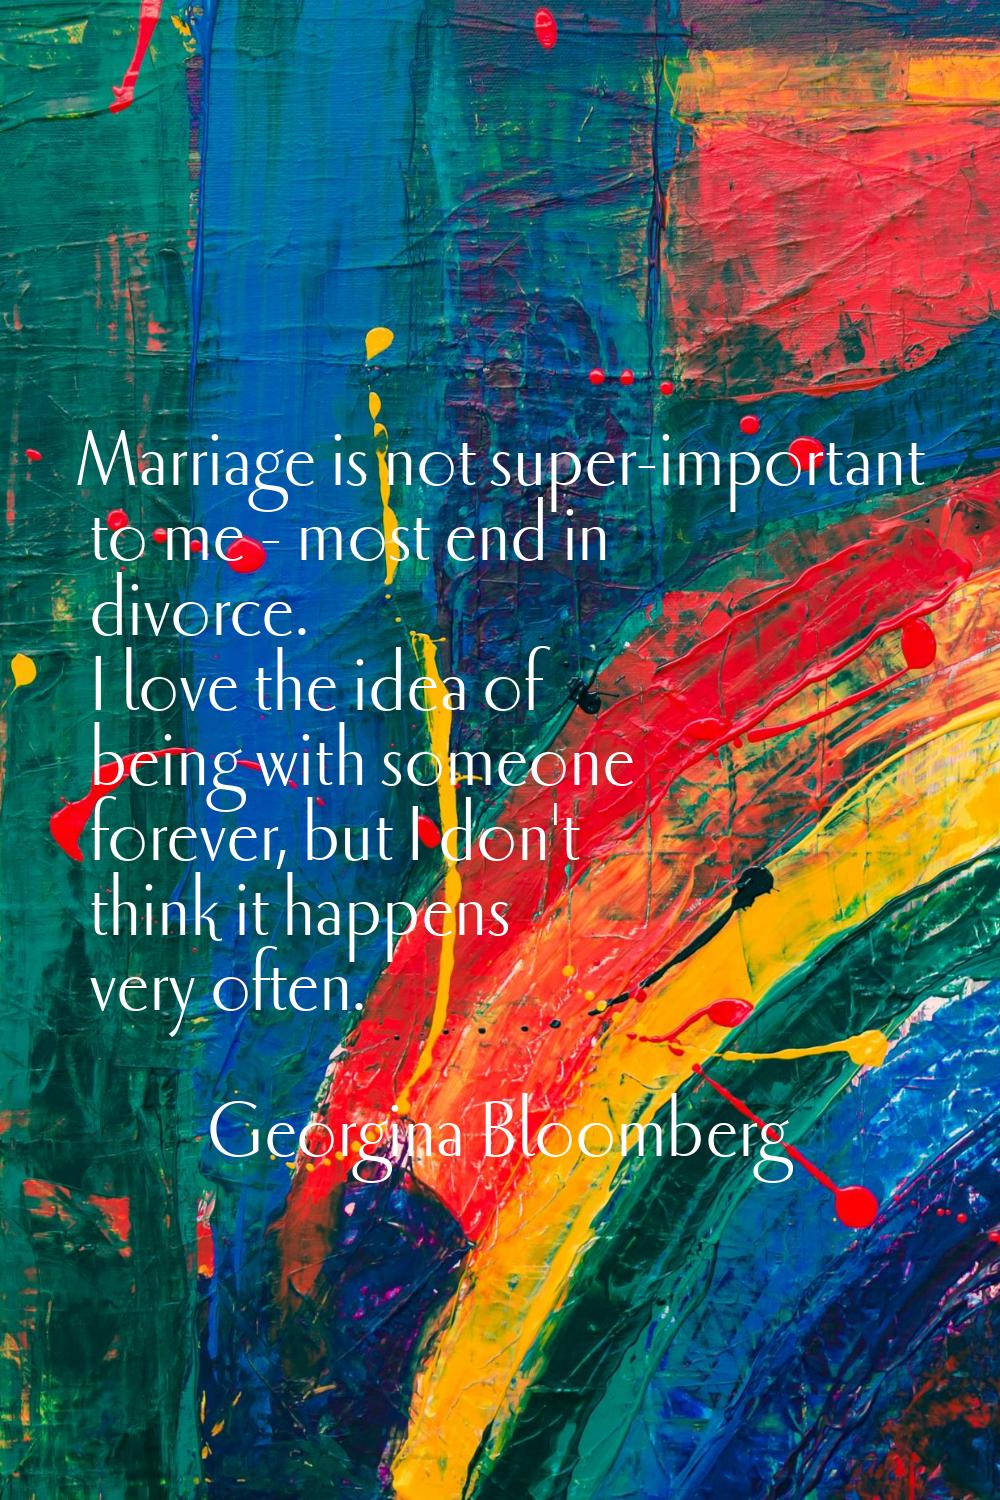 Marriage is not super-important to me - most end in divorce. I love the idea of being with someone 